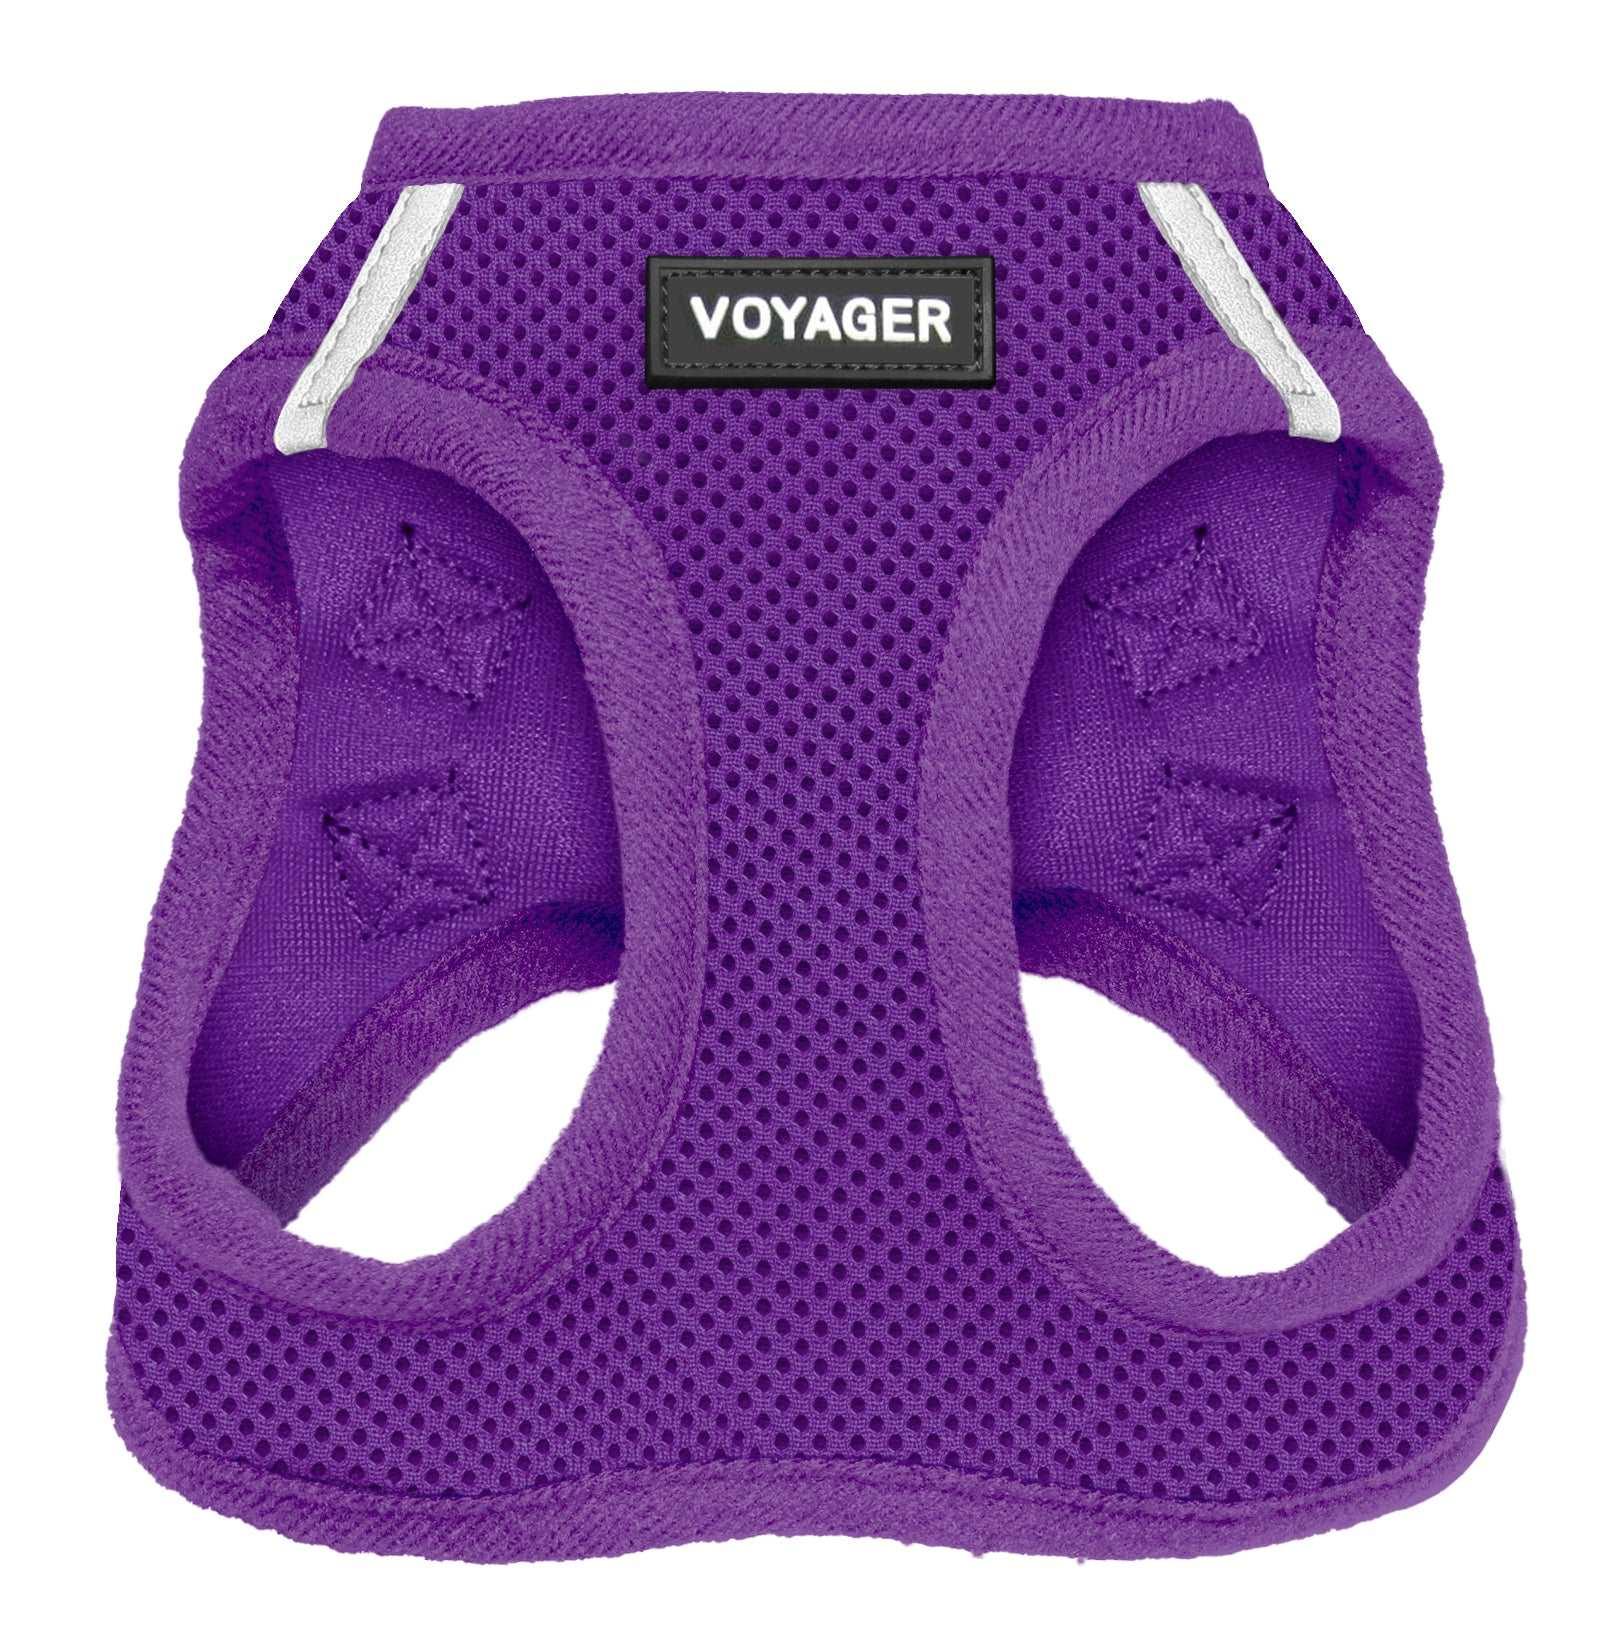 VOYAGER Step-In Air Pet Harness in Purple with Matching Trim and Webbing - Front